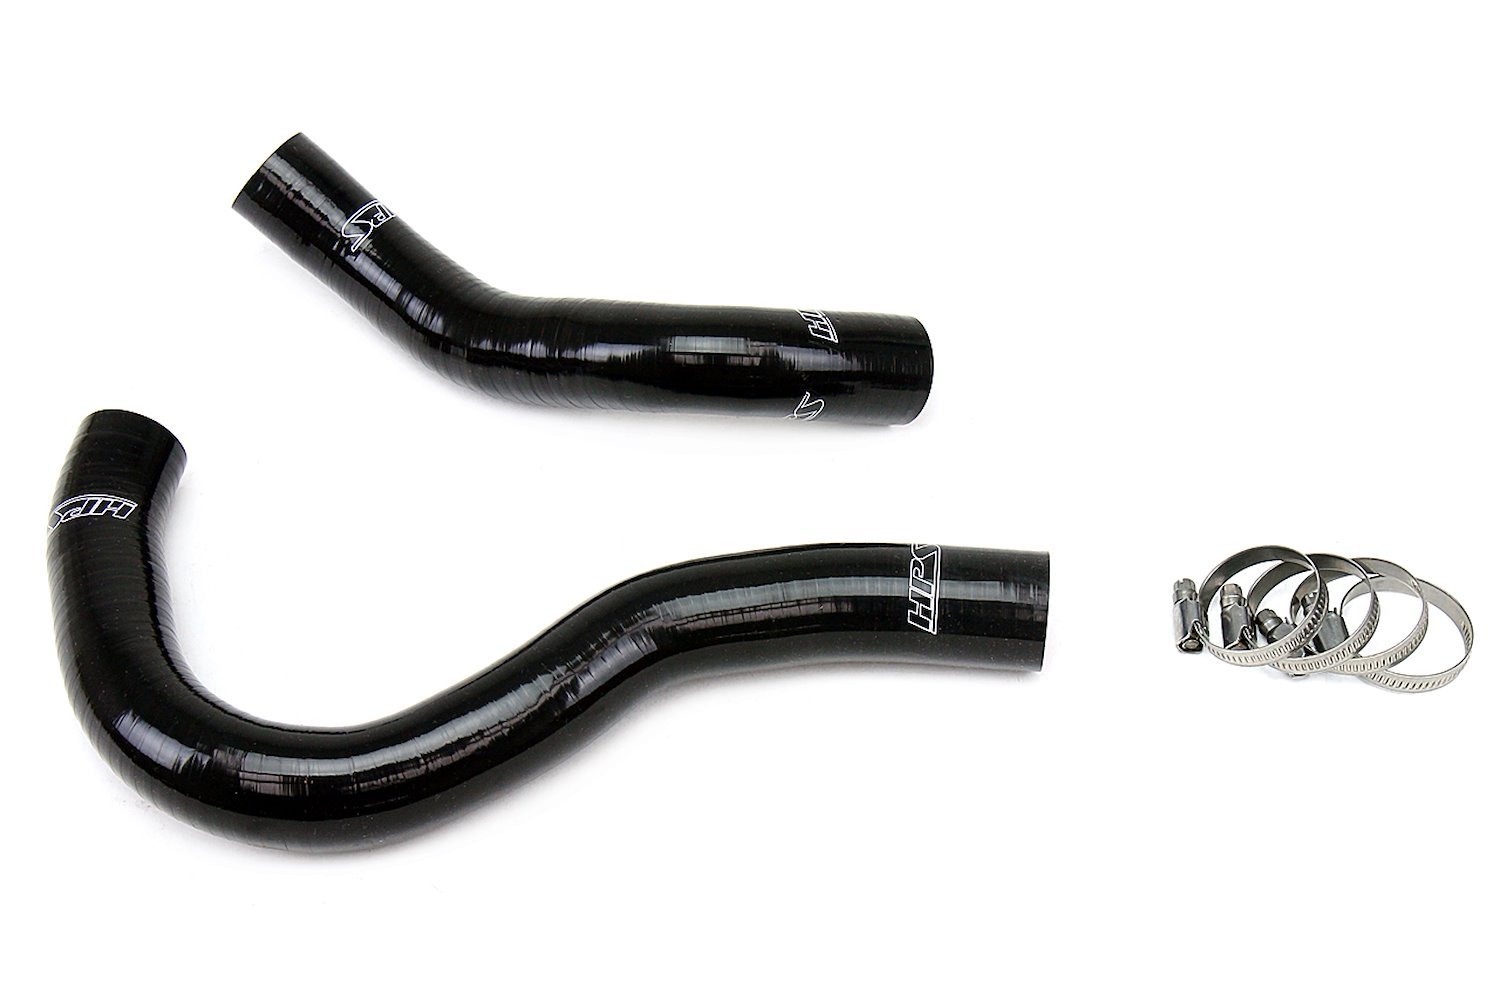 57-1001-BLK Radiator Hose Kit, High-Temp 3-Ply Reinforced Silicone, Replace OEM Rubber Radiator Coolant Hoses